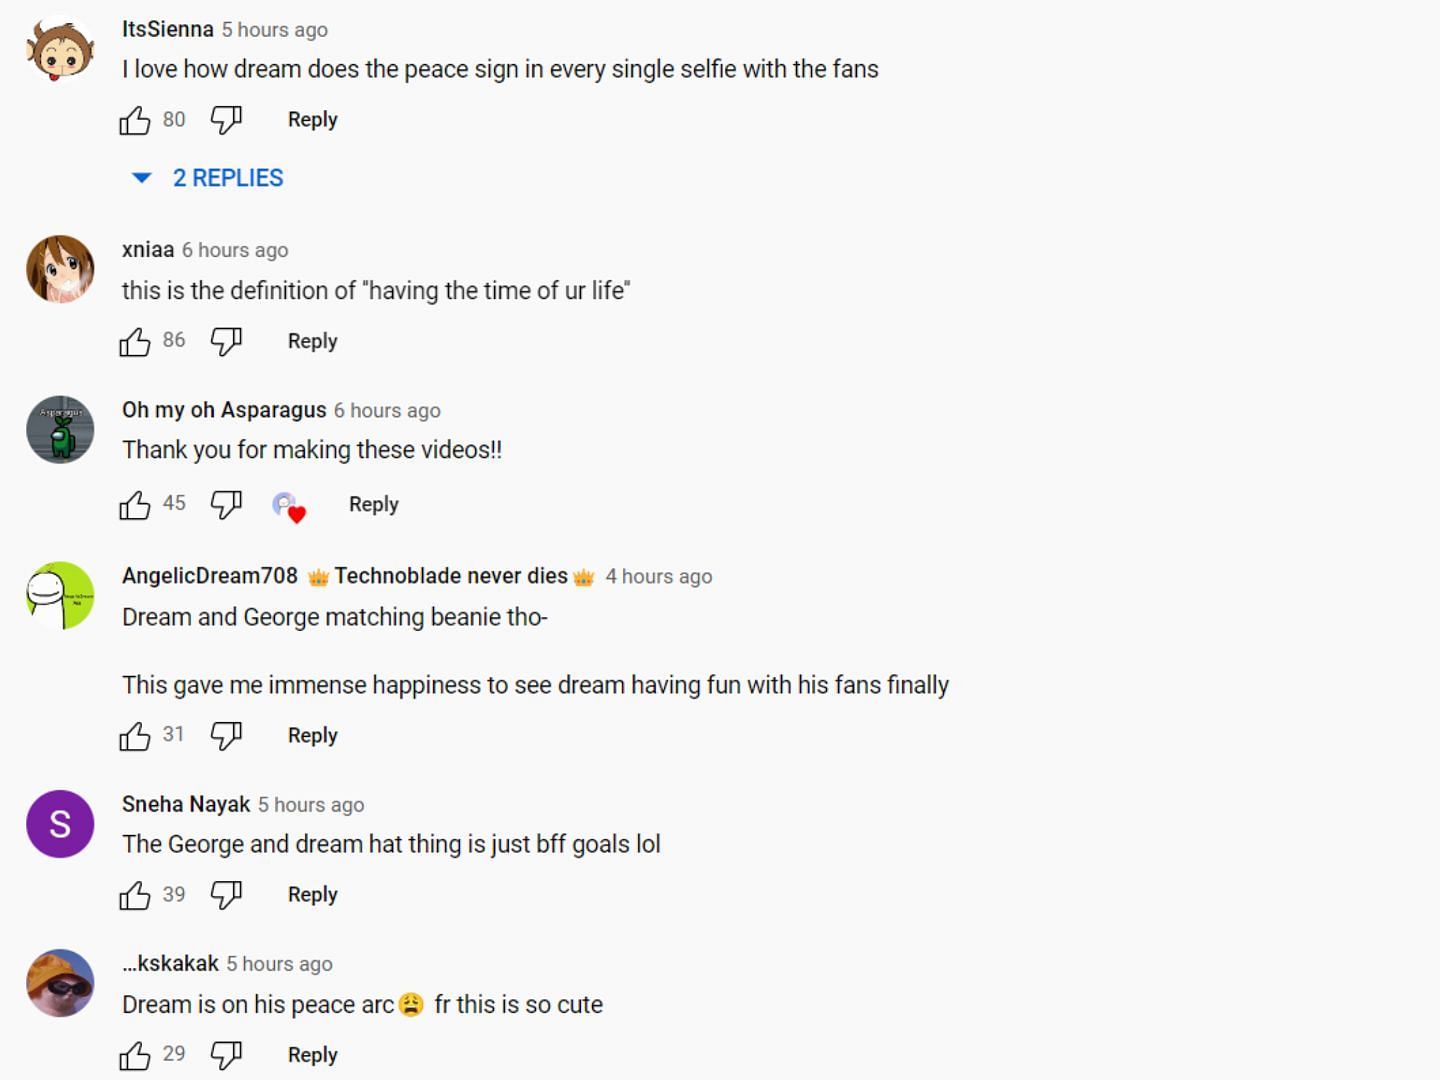 YouTube comments section reacting to Clay's first in-person meet at TwitchCon 2022 1/2 (Image via MCYTwastaken/YouTube)